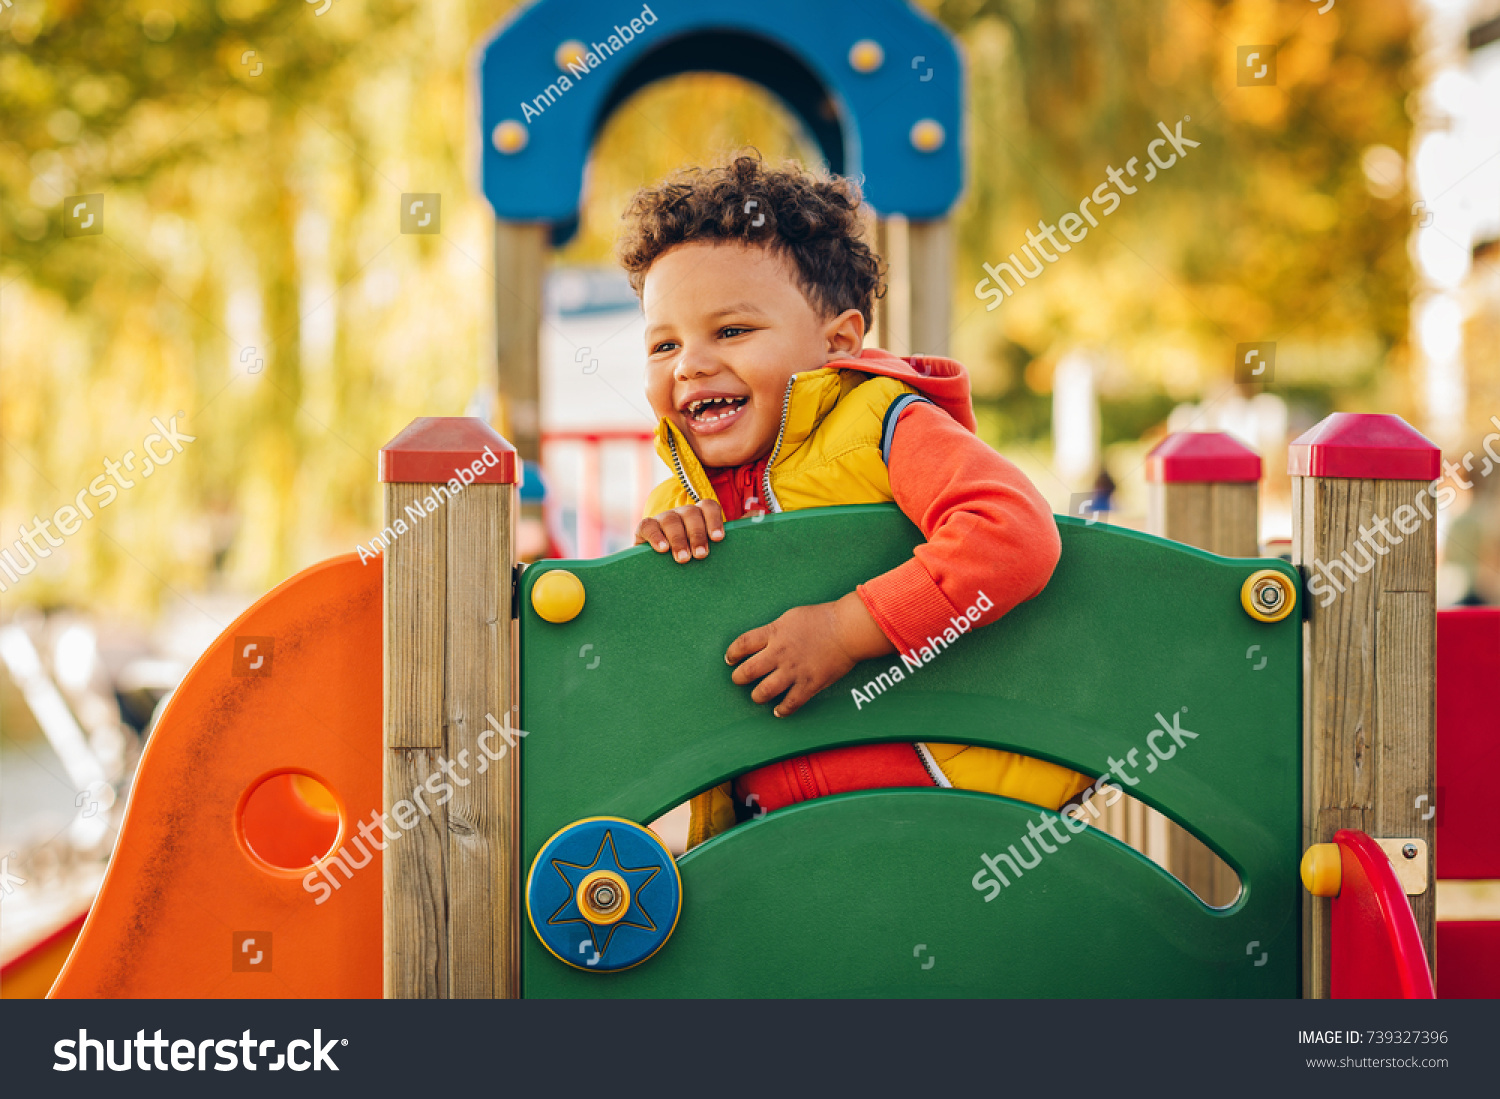 Adorable little 1-2 year old toddler boy having fun on playground, child wearing orange hoody jacket and yellow vest  #739327396